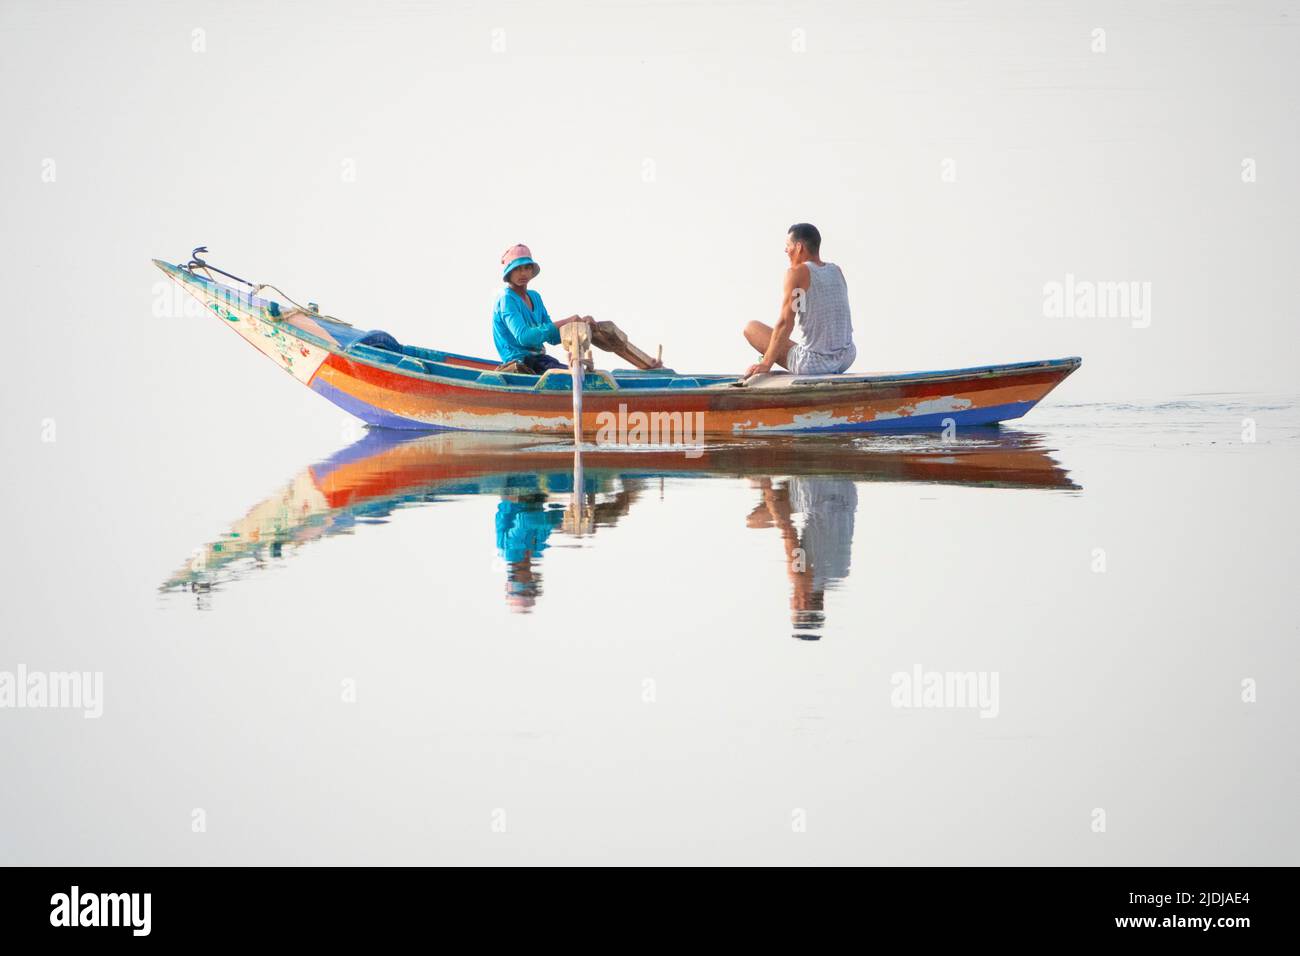 Two young men, one rowing and one on mobile phone in a brightly painted wooden boat perfectly reflected in mirror surface water Stock Photo